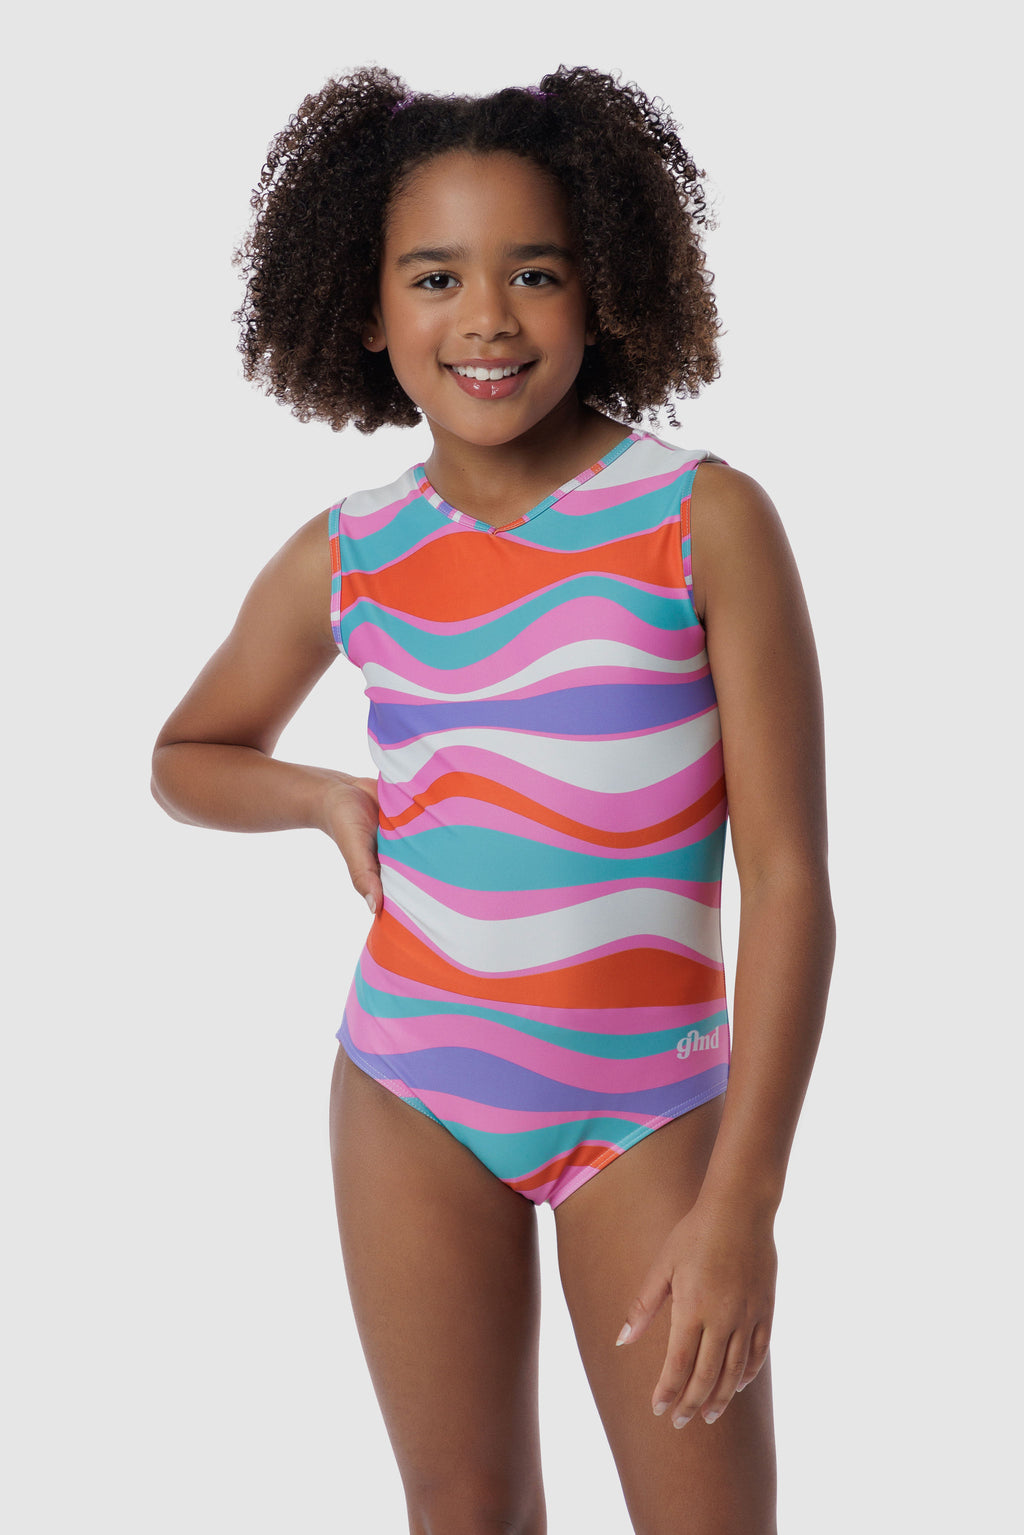 Photo of a 5 year old girl, standing iPhoto of a 10 year old girl standing infront of a white backdrop. Wearing a wavy pattern gymnastics leotard that is a mix of purple, aqua, white & purple. There are no crystals, making it great for training.